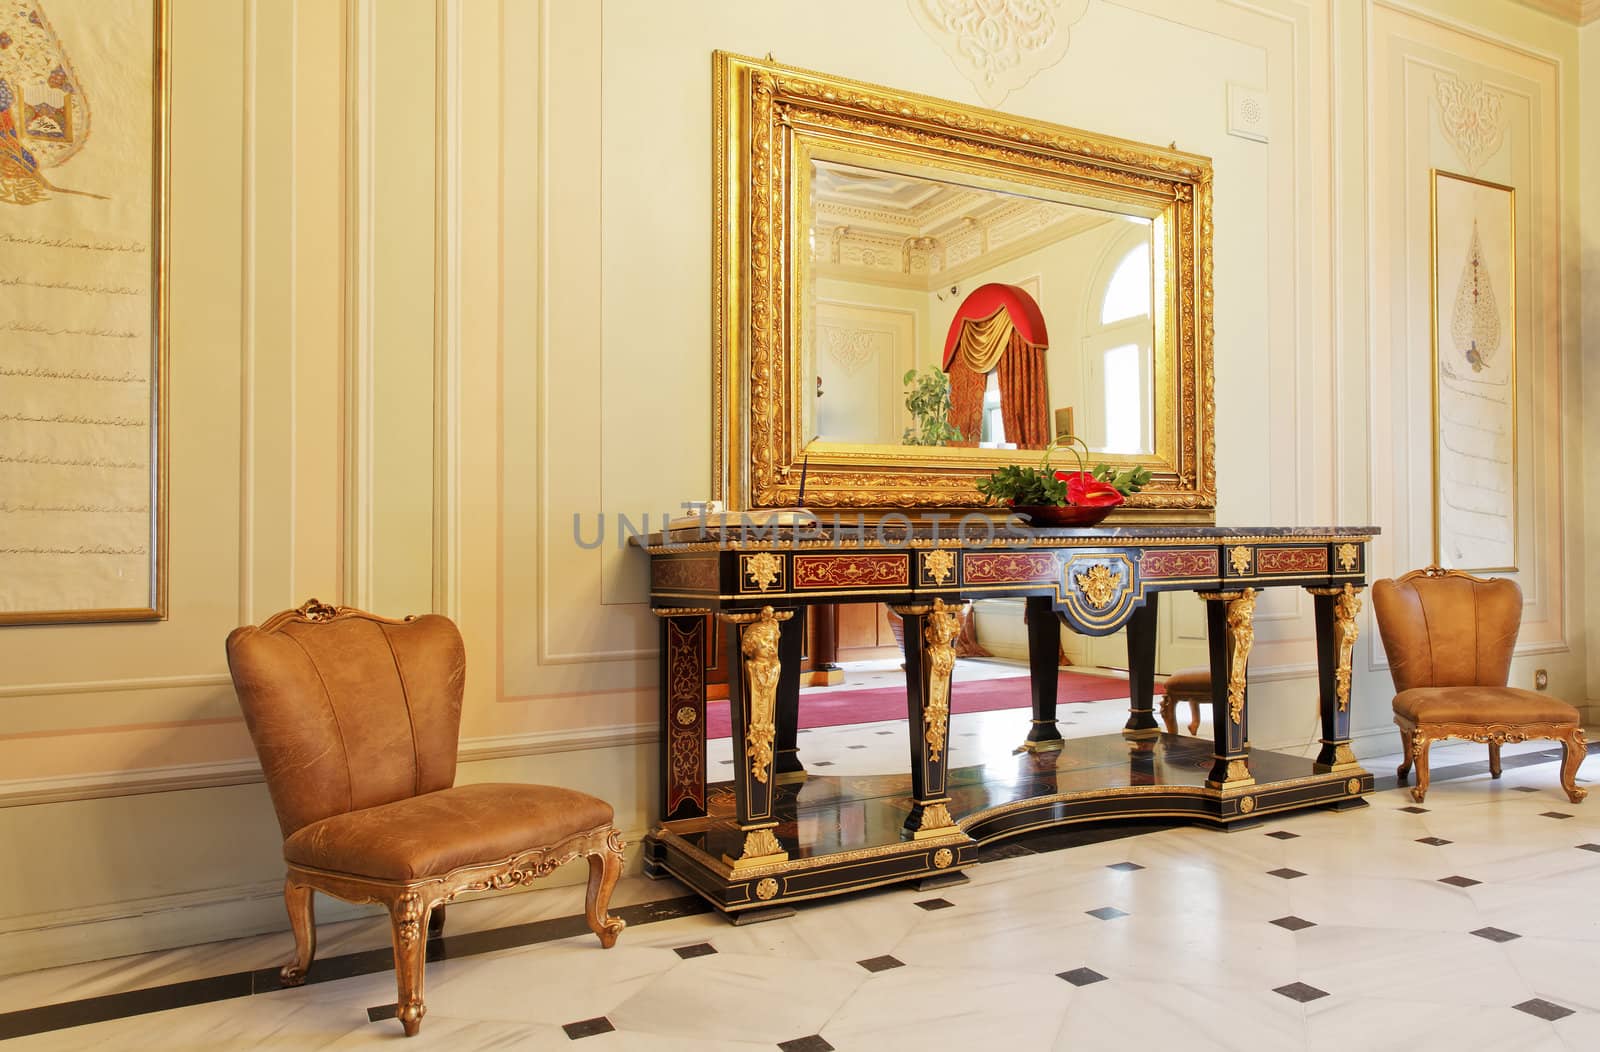 Bosphorus Palace Hallway, Istanbul, Turkey - July 2, 2011: Elegant Ottoman style of furniture and interior decorations with paneled walls, visitors chairs, large mirror, side table and tiled flooring